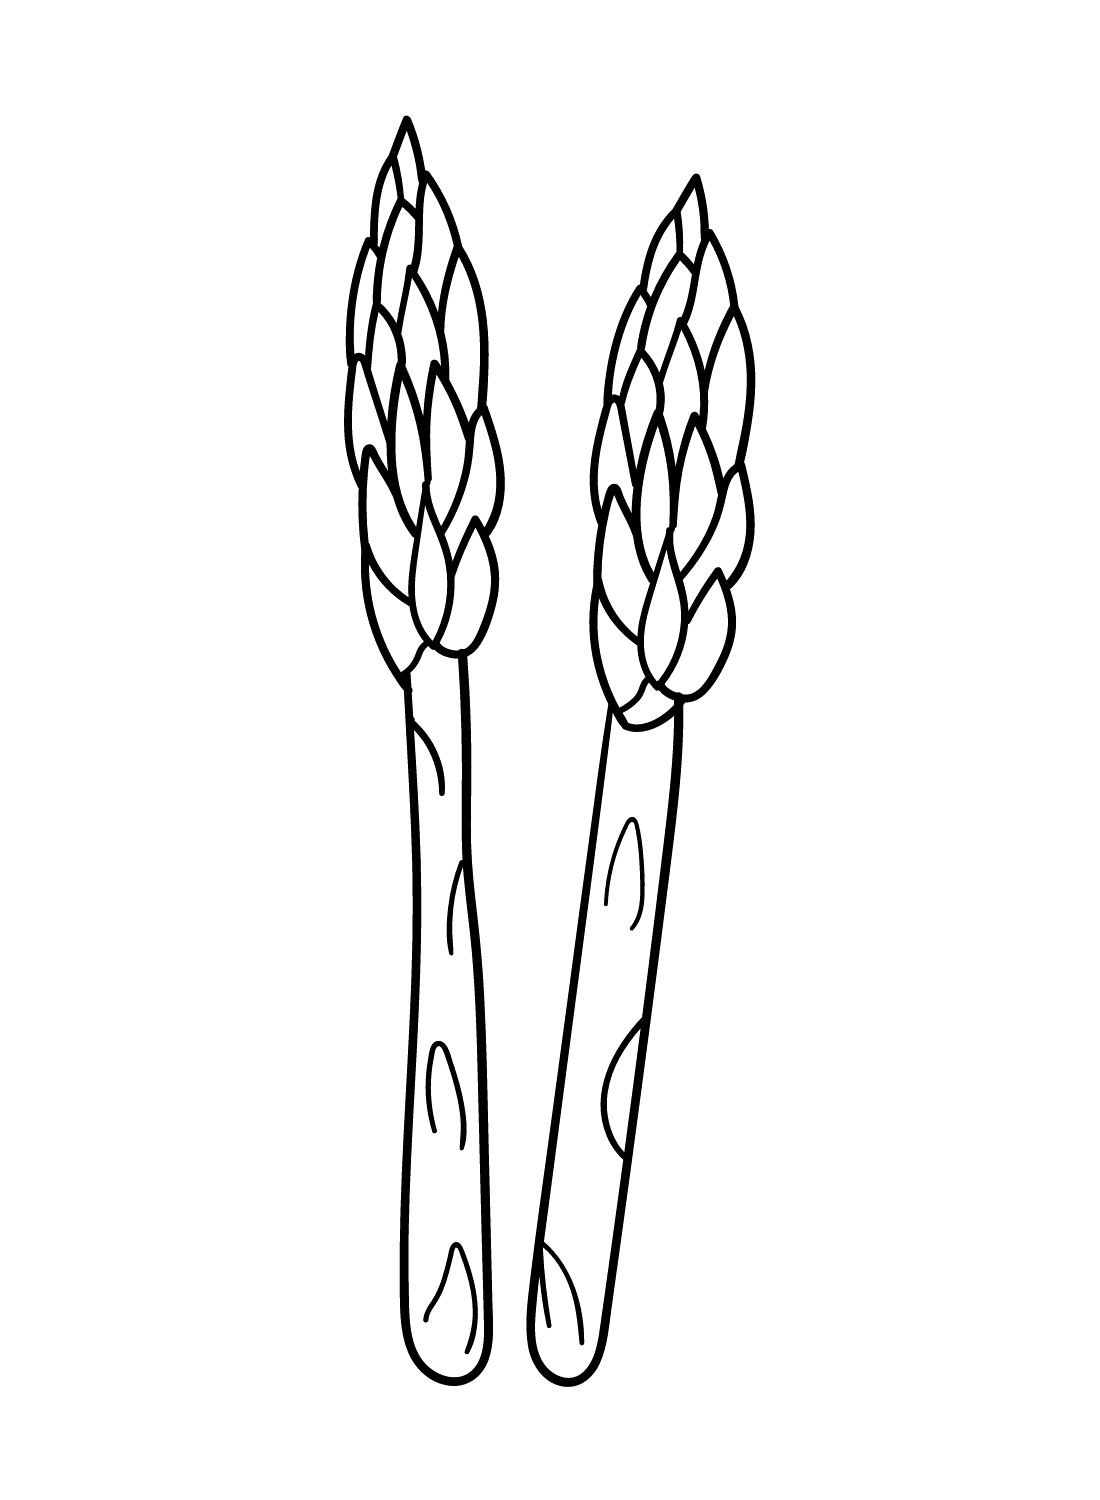 Asparagus for Children Coloring Page